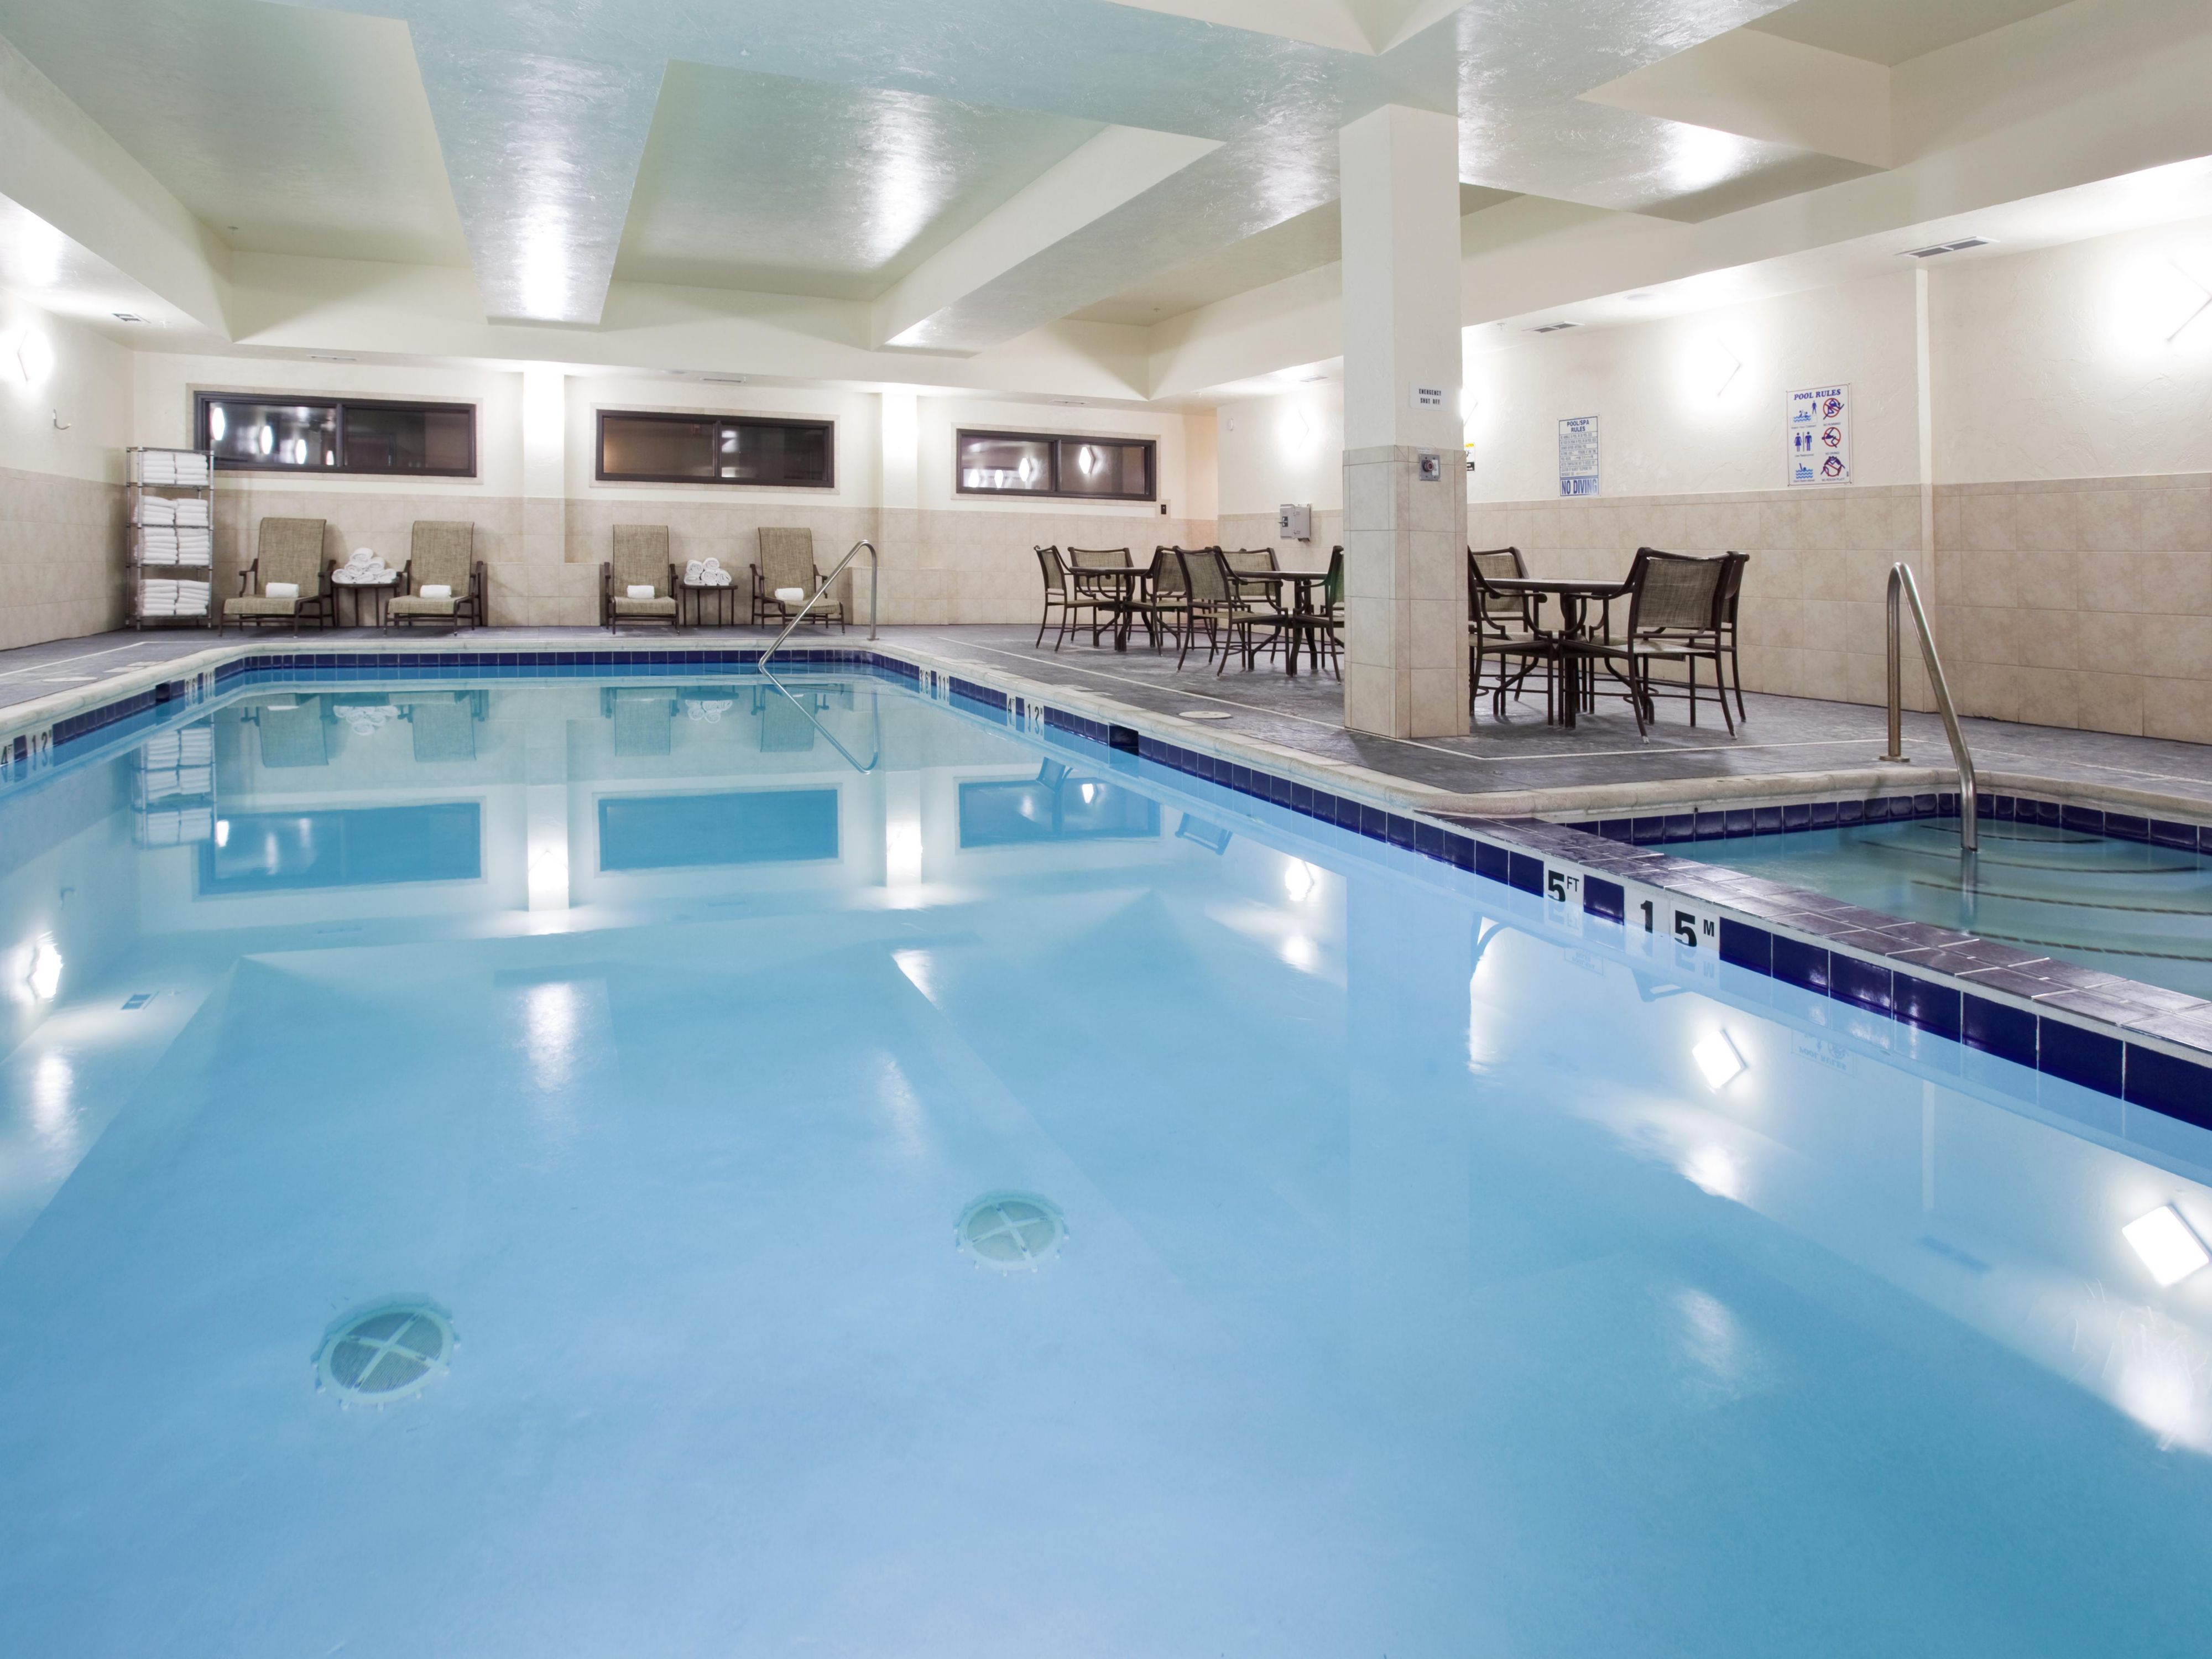 Enjoy the pool and Fitness Center at the Holiday Inn Parker. Masks are encouraged but not required for vaccinated individuals.